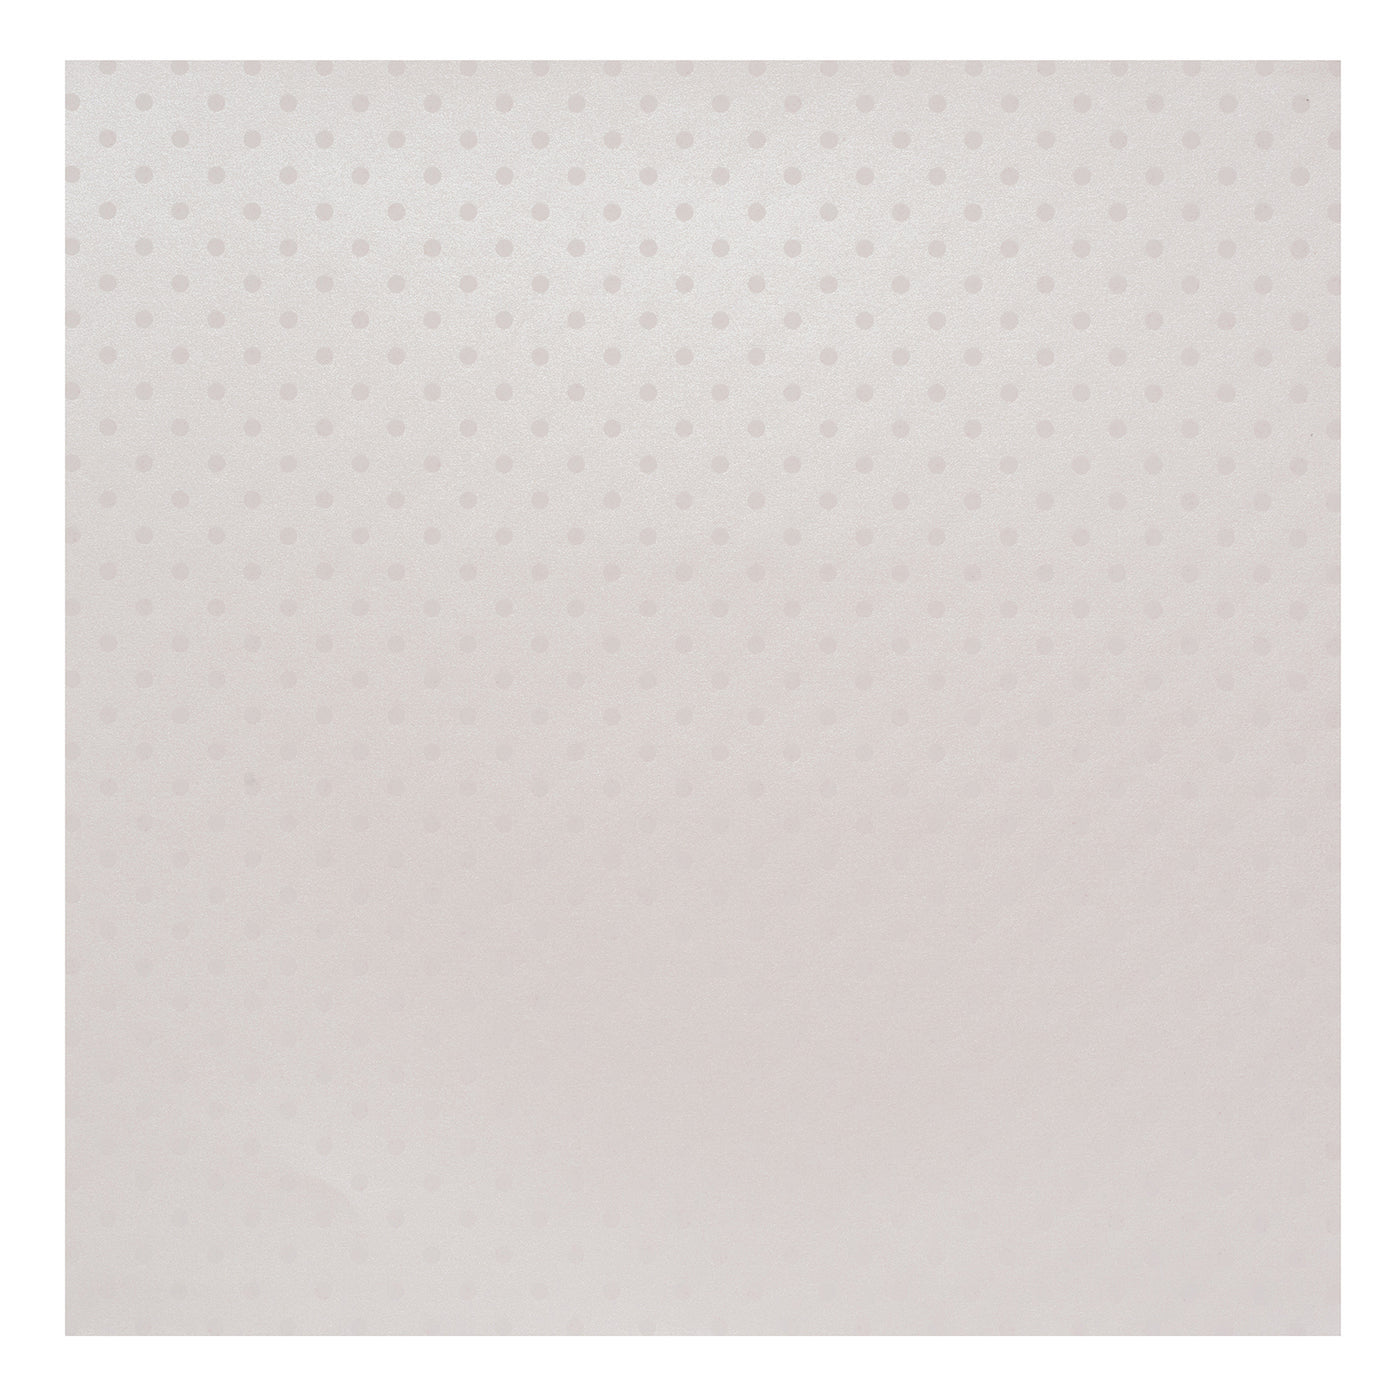 White dots on white, pearlescent 12x12 cardstock by Core'dinations.  White reverse. Archival quality and acid-free.